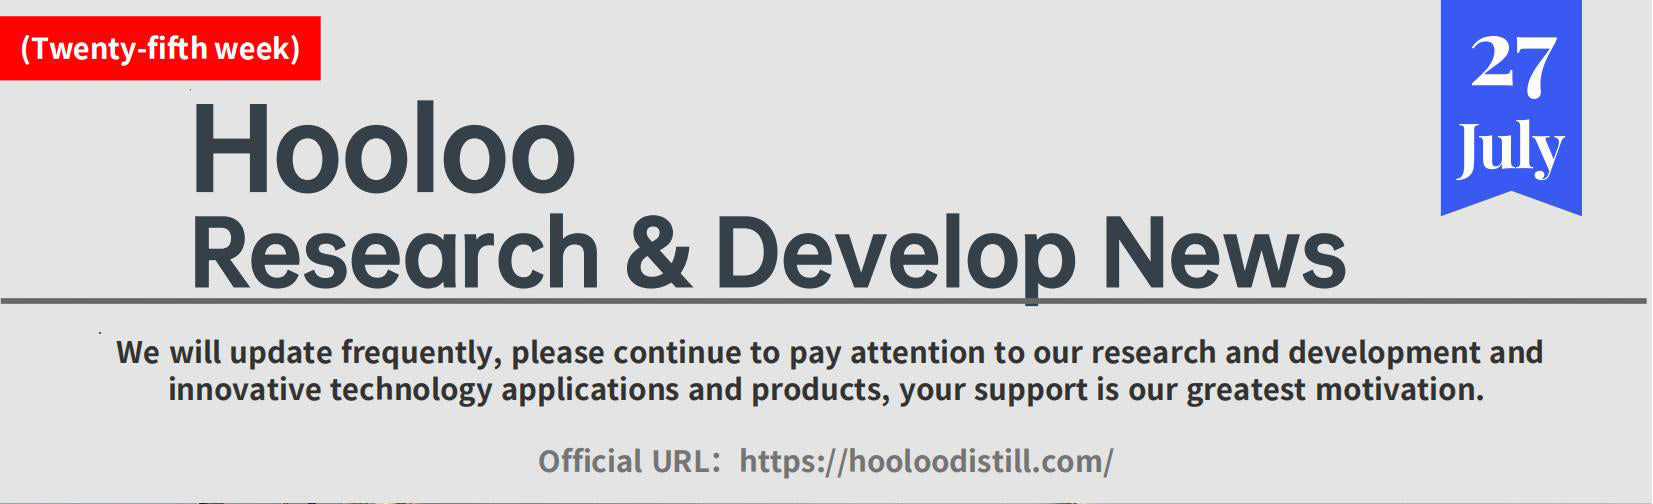 Hooloo Research & Develop News (issue 25)